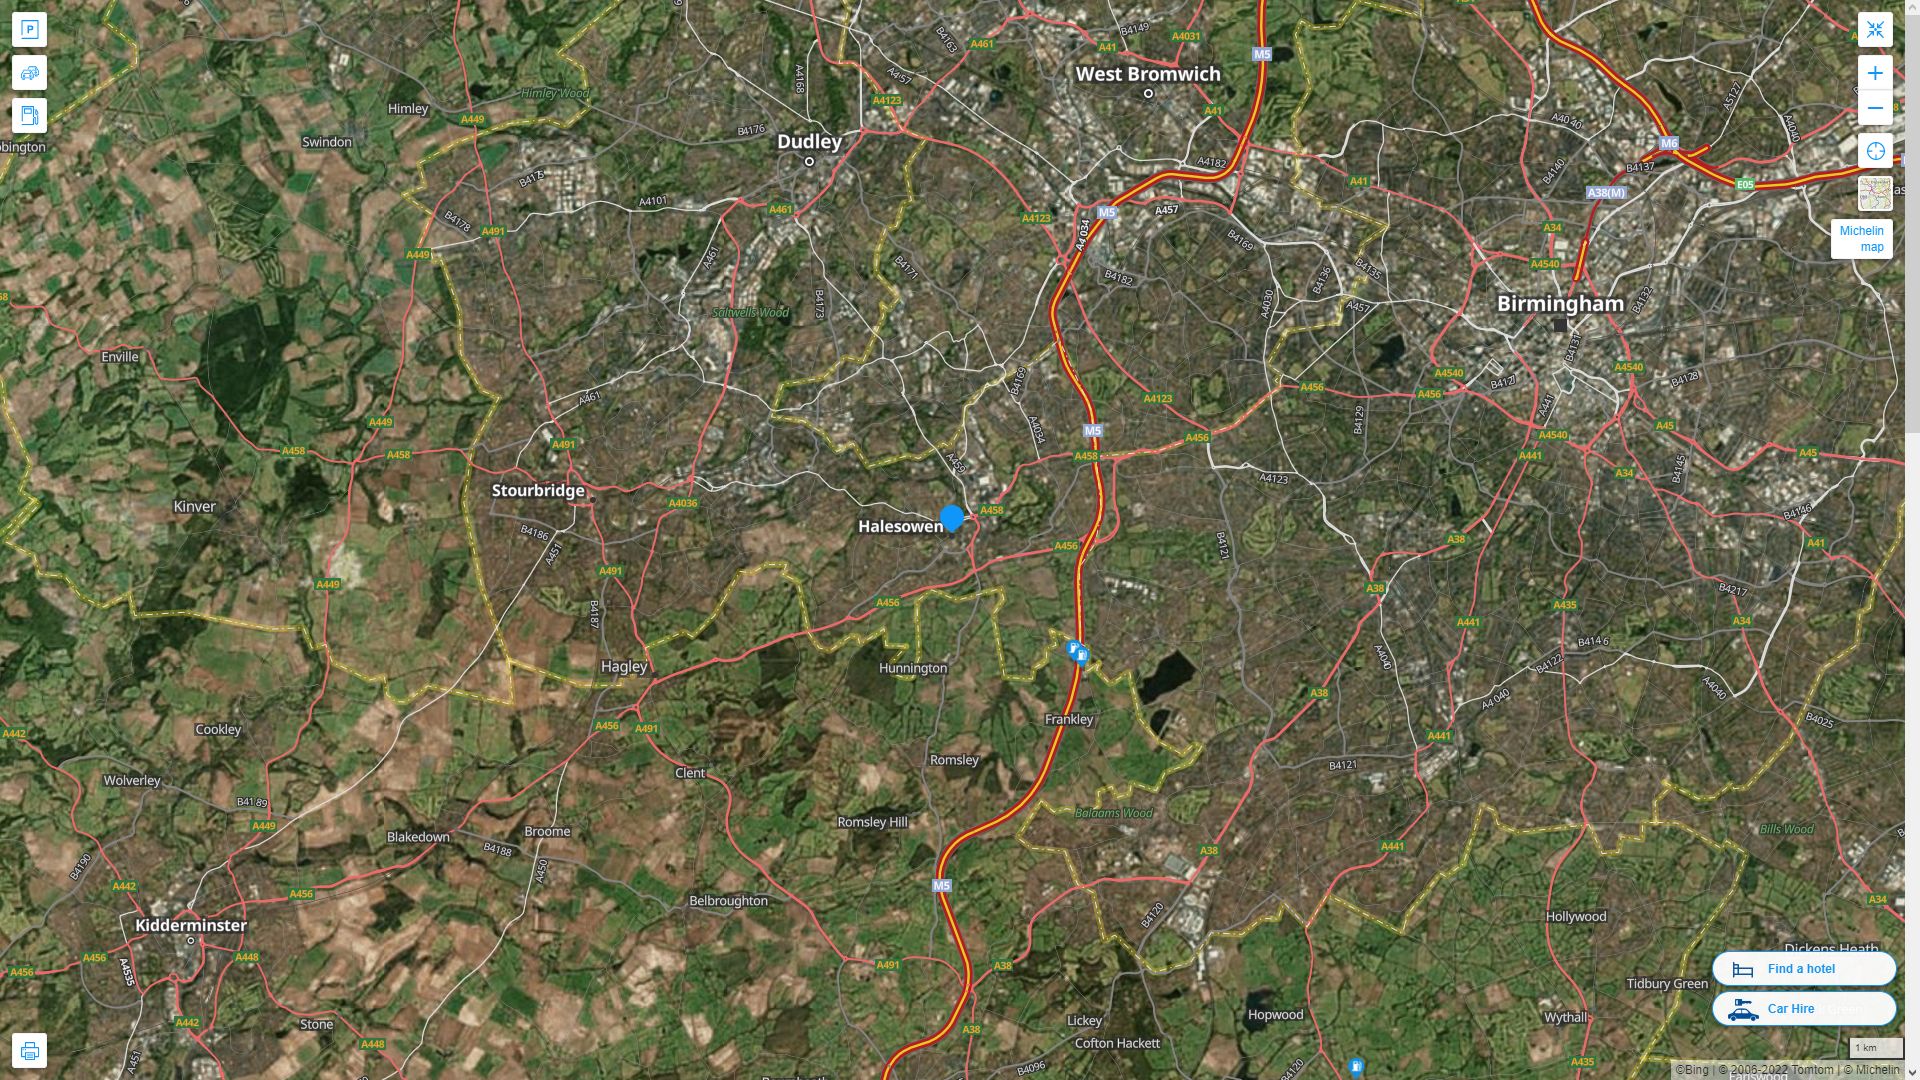 Halesowen Highway and Road Map with Satellite View